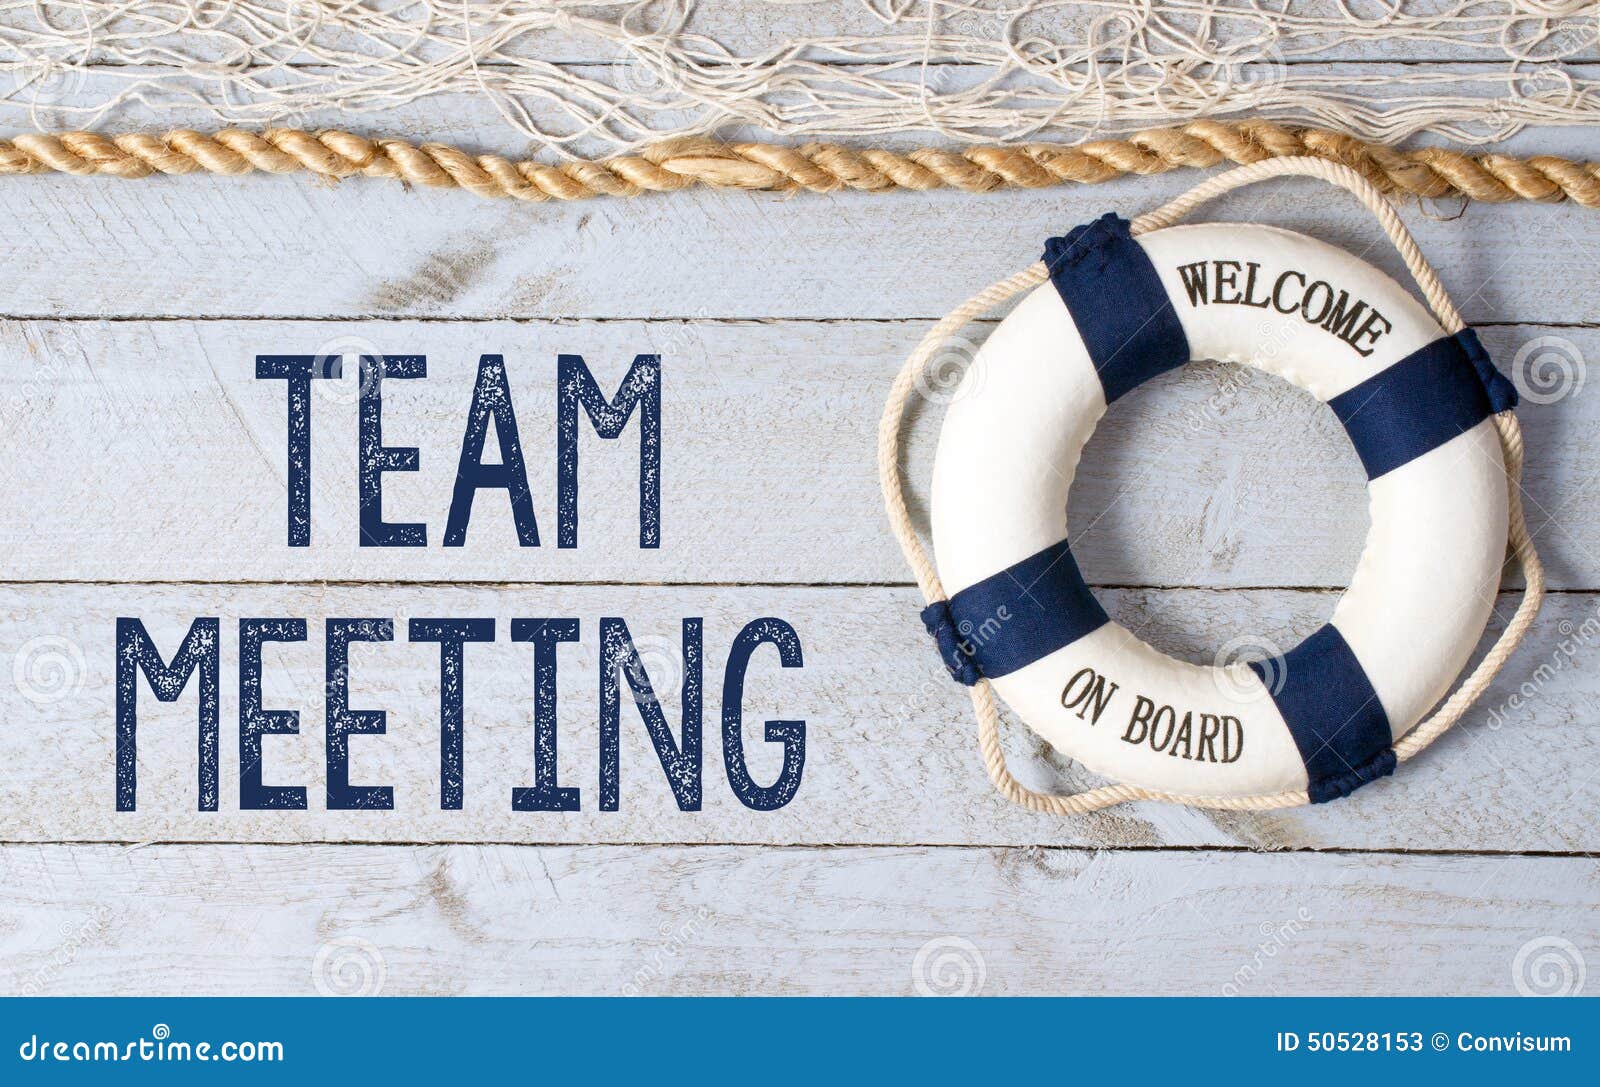 Team meeting stock image. Image of graphic, white, board - 50528153